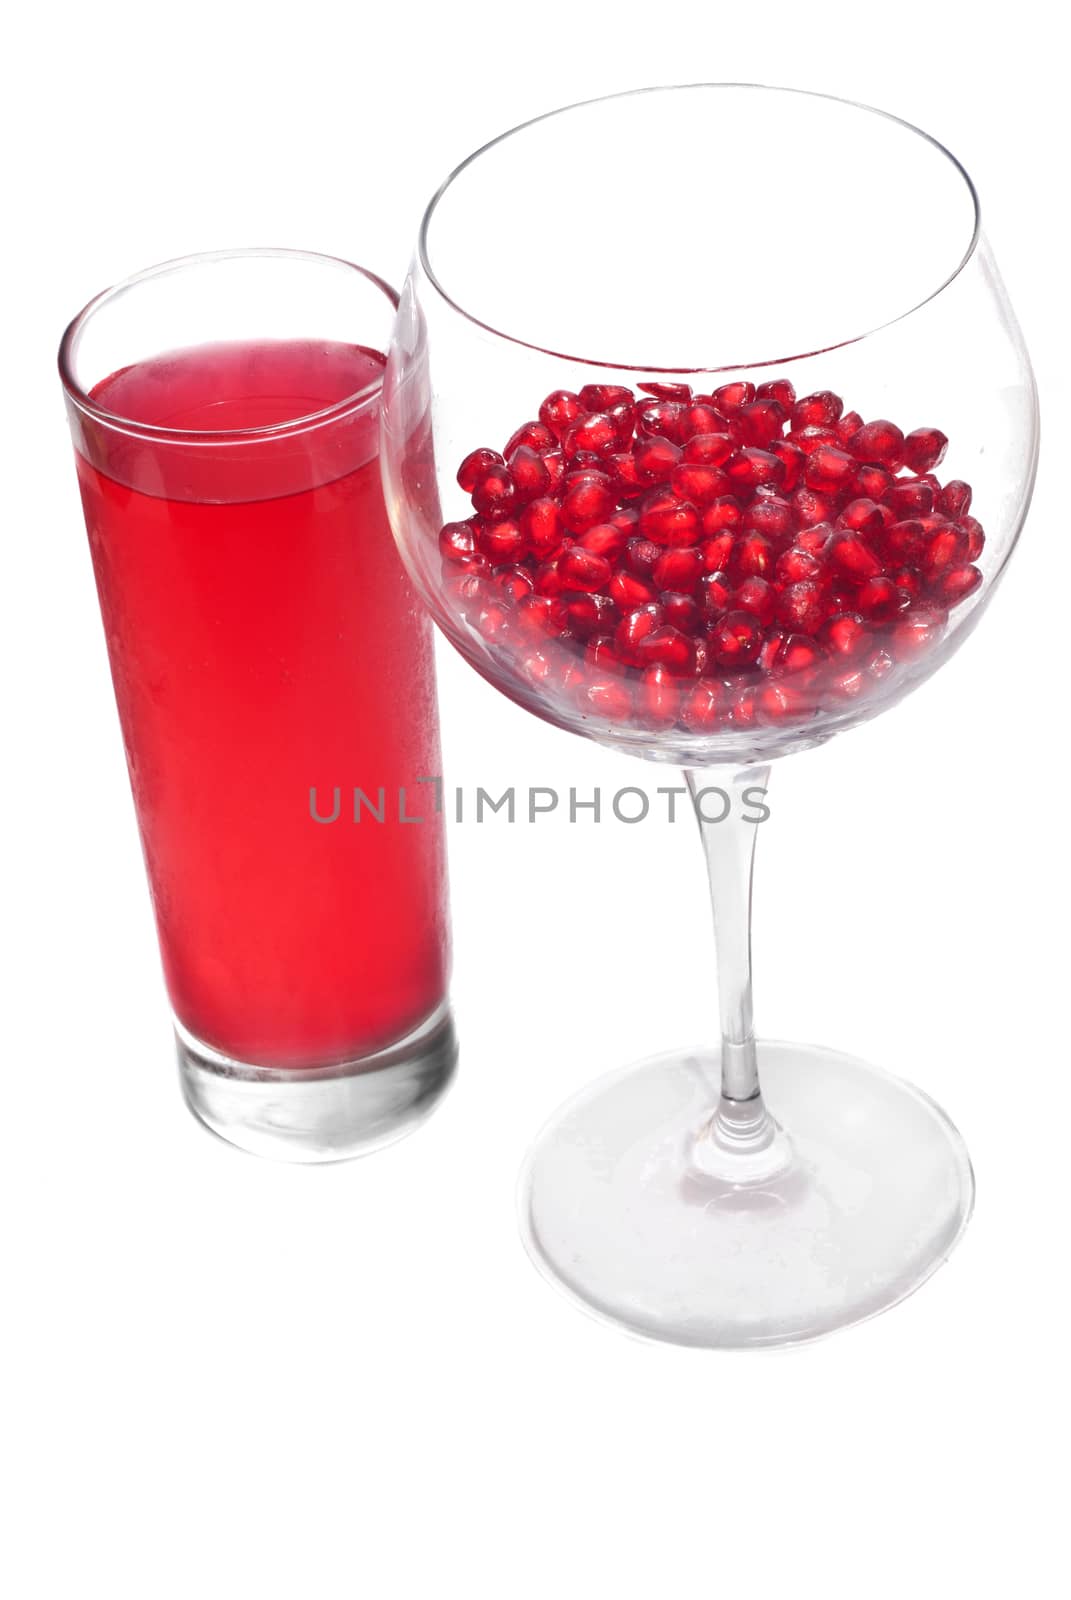 fresh grains and juice pomegranate in glass isolated on white background